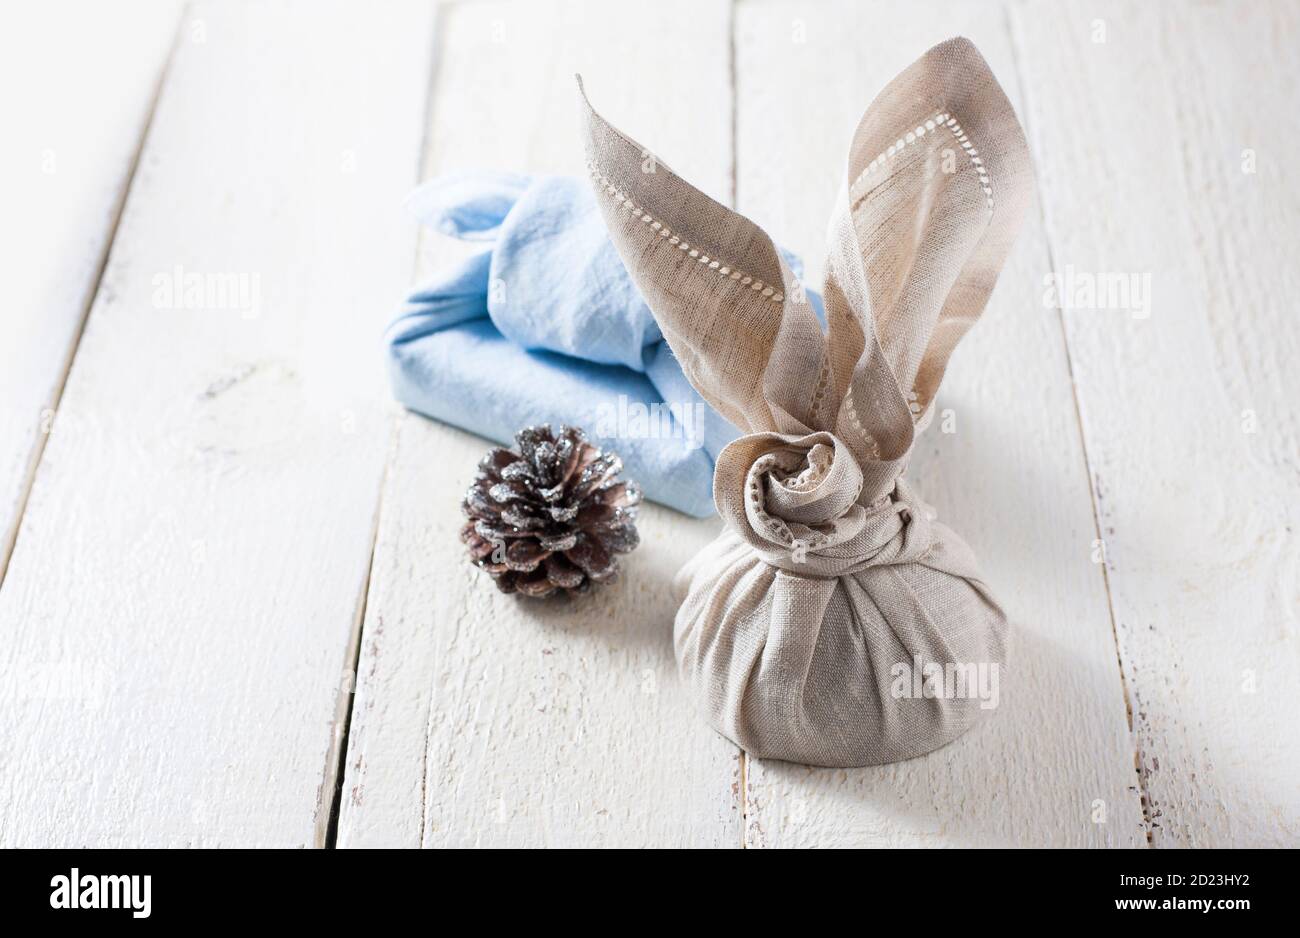 Furoshiki - traditional Japanese technique of wrapping tying items for gift. Zero waste gift wrapping. Stock Photo